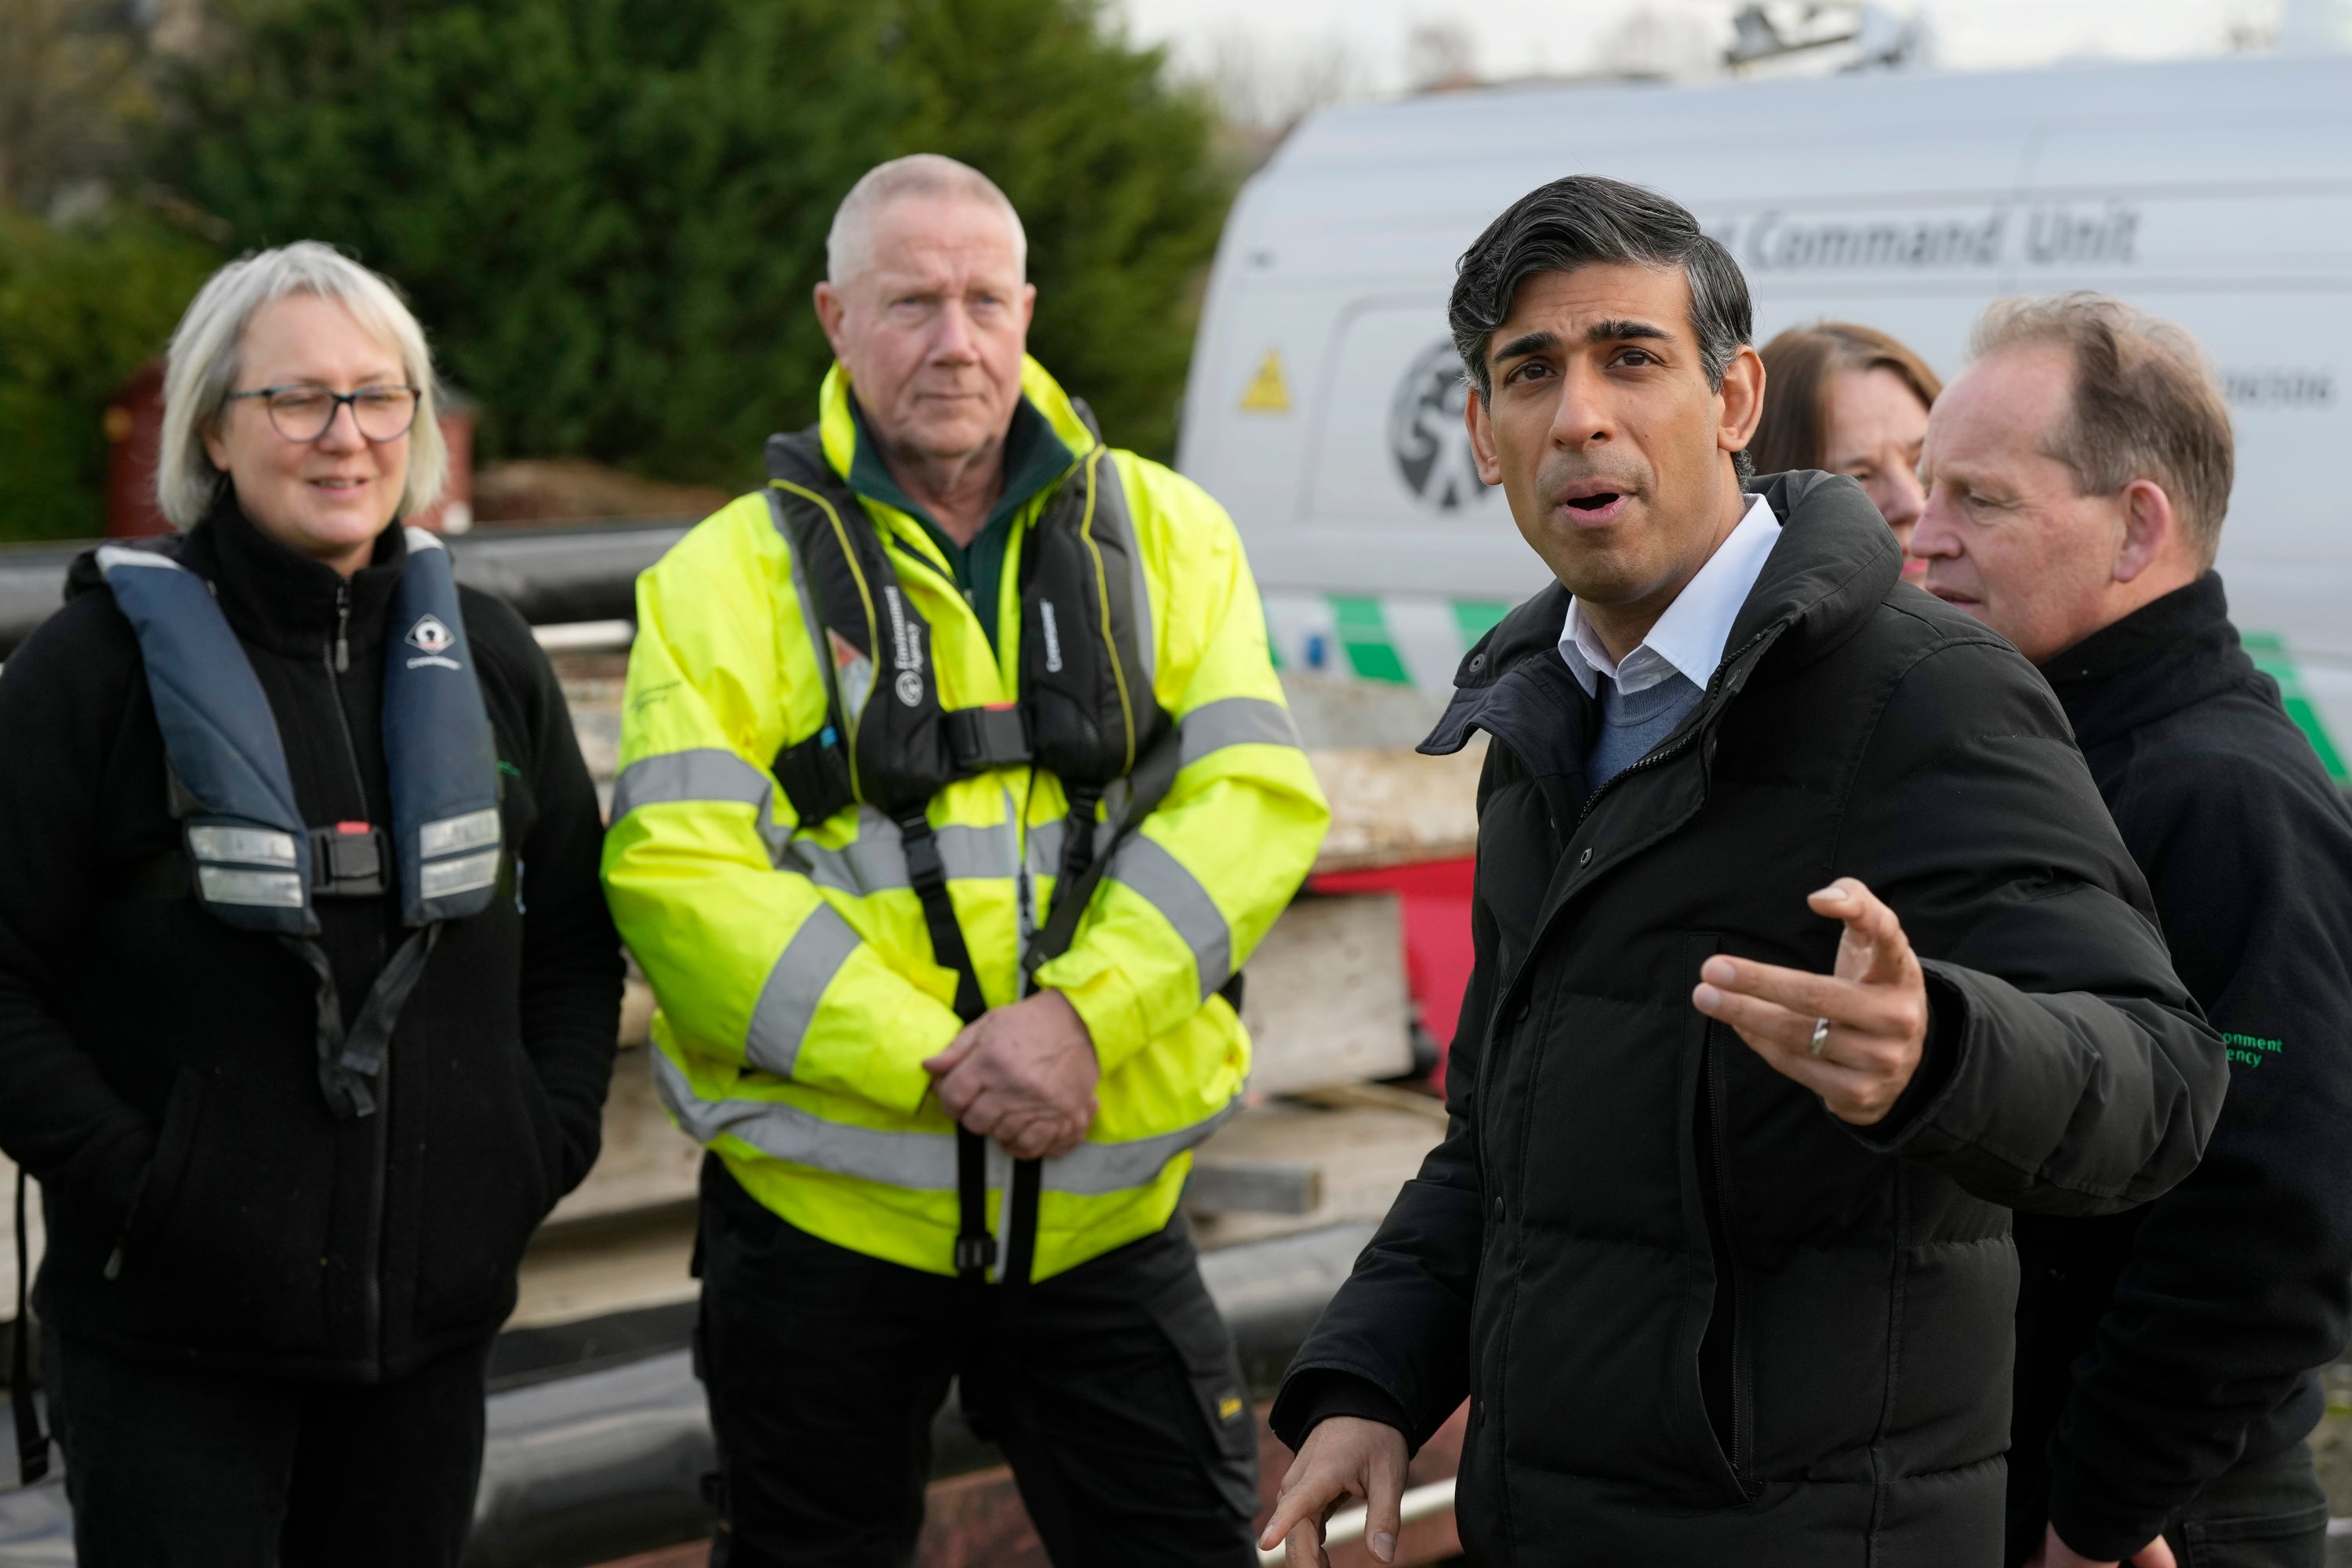 Rishi Sunak speaks to members of the Environment Agency as he looks at flood defences during a visit to Osney, Oxford